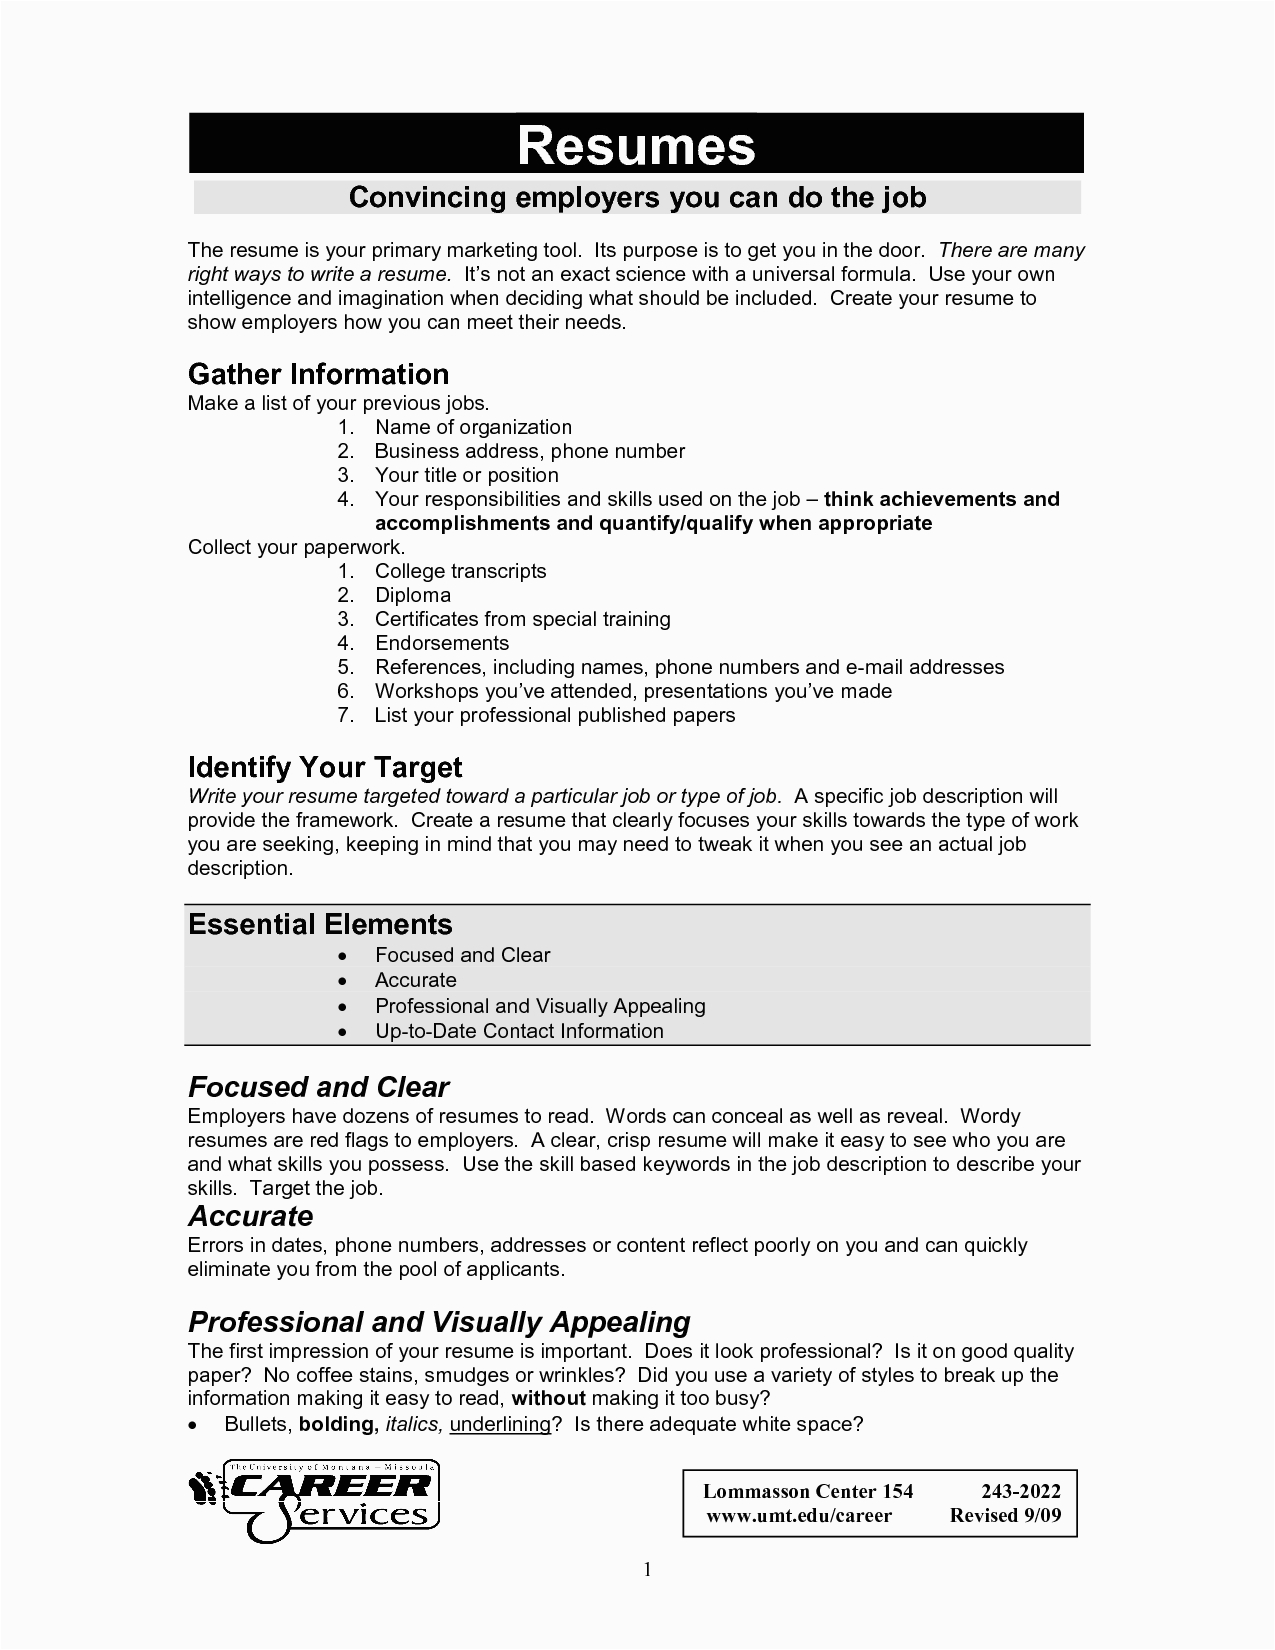 Sample Resume for 16 Year Old 11 Resume Template for 16 Year Old Ideas